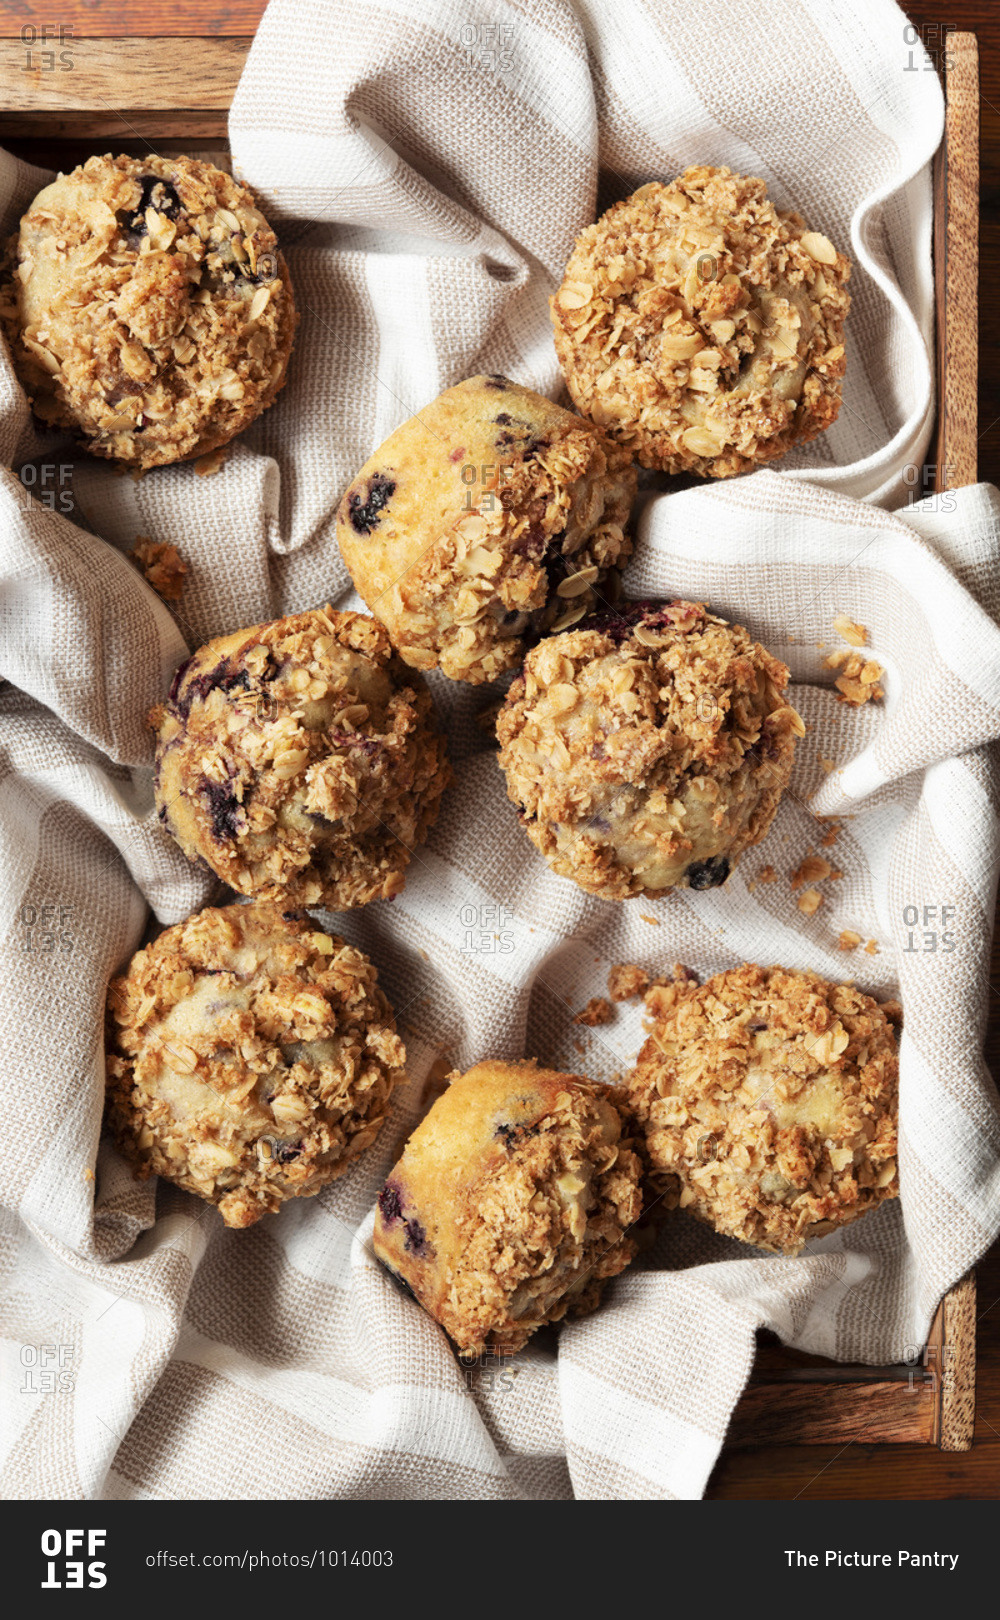 Mixed berry muffins with oat crumble topping.